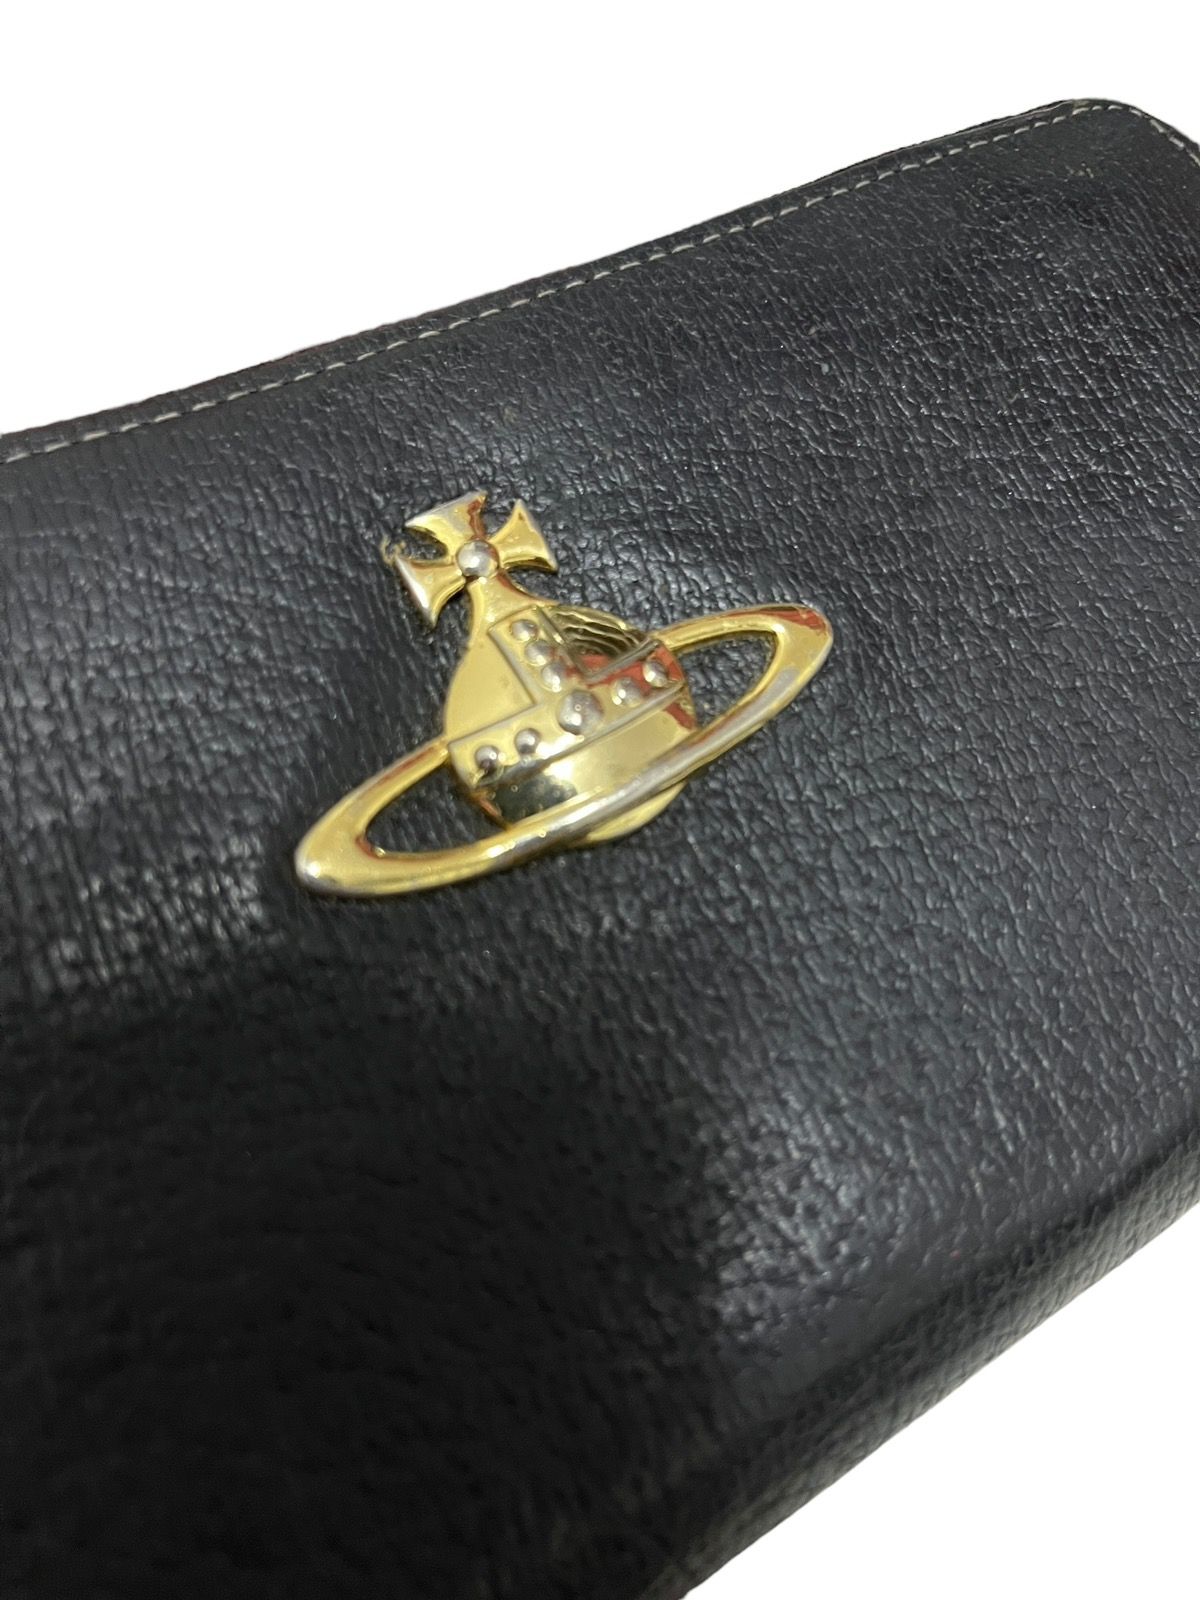 ✅FREE SHIPPING✅ Vivienne Westwood Big Orb Gold - 2